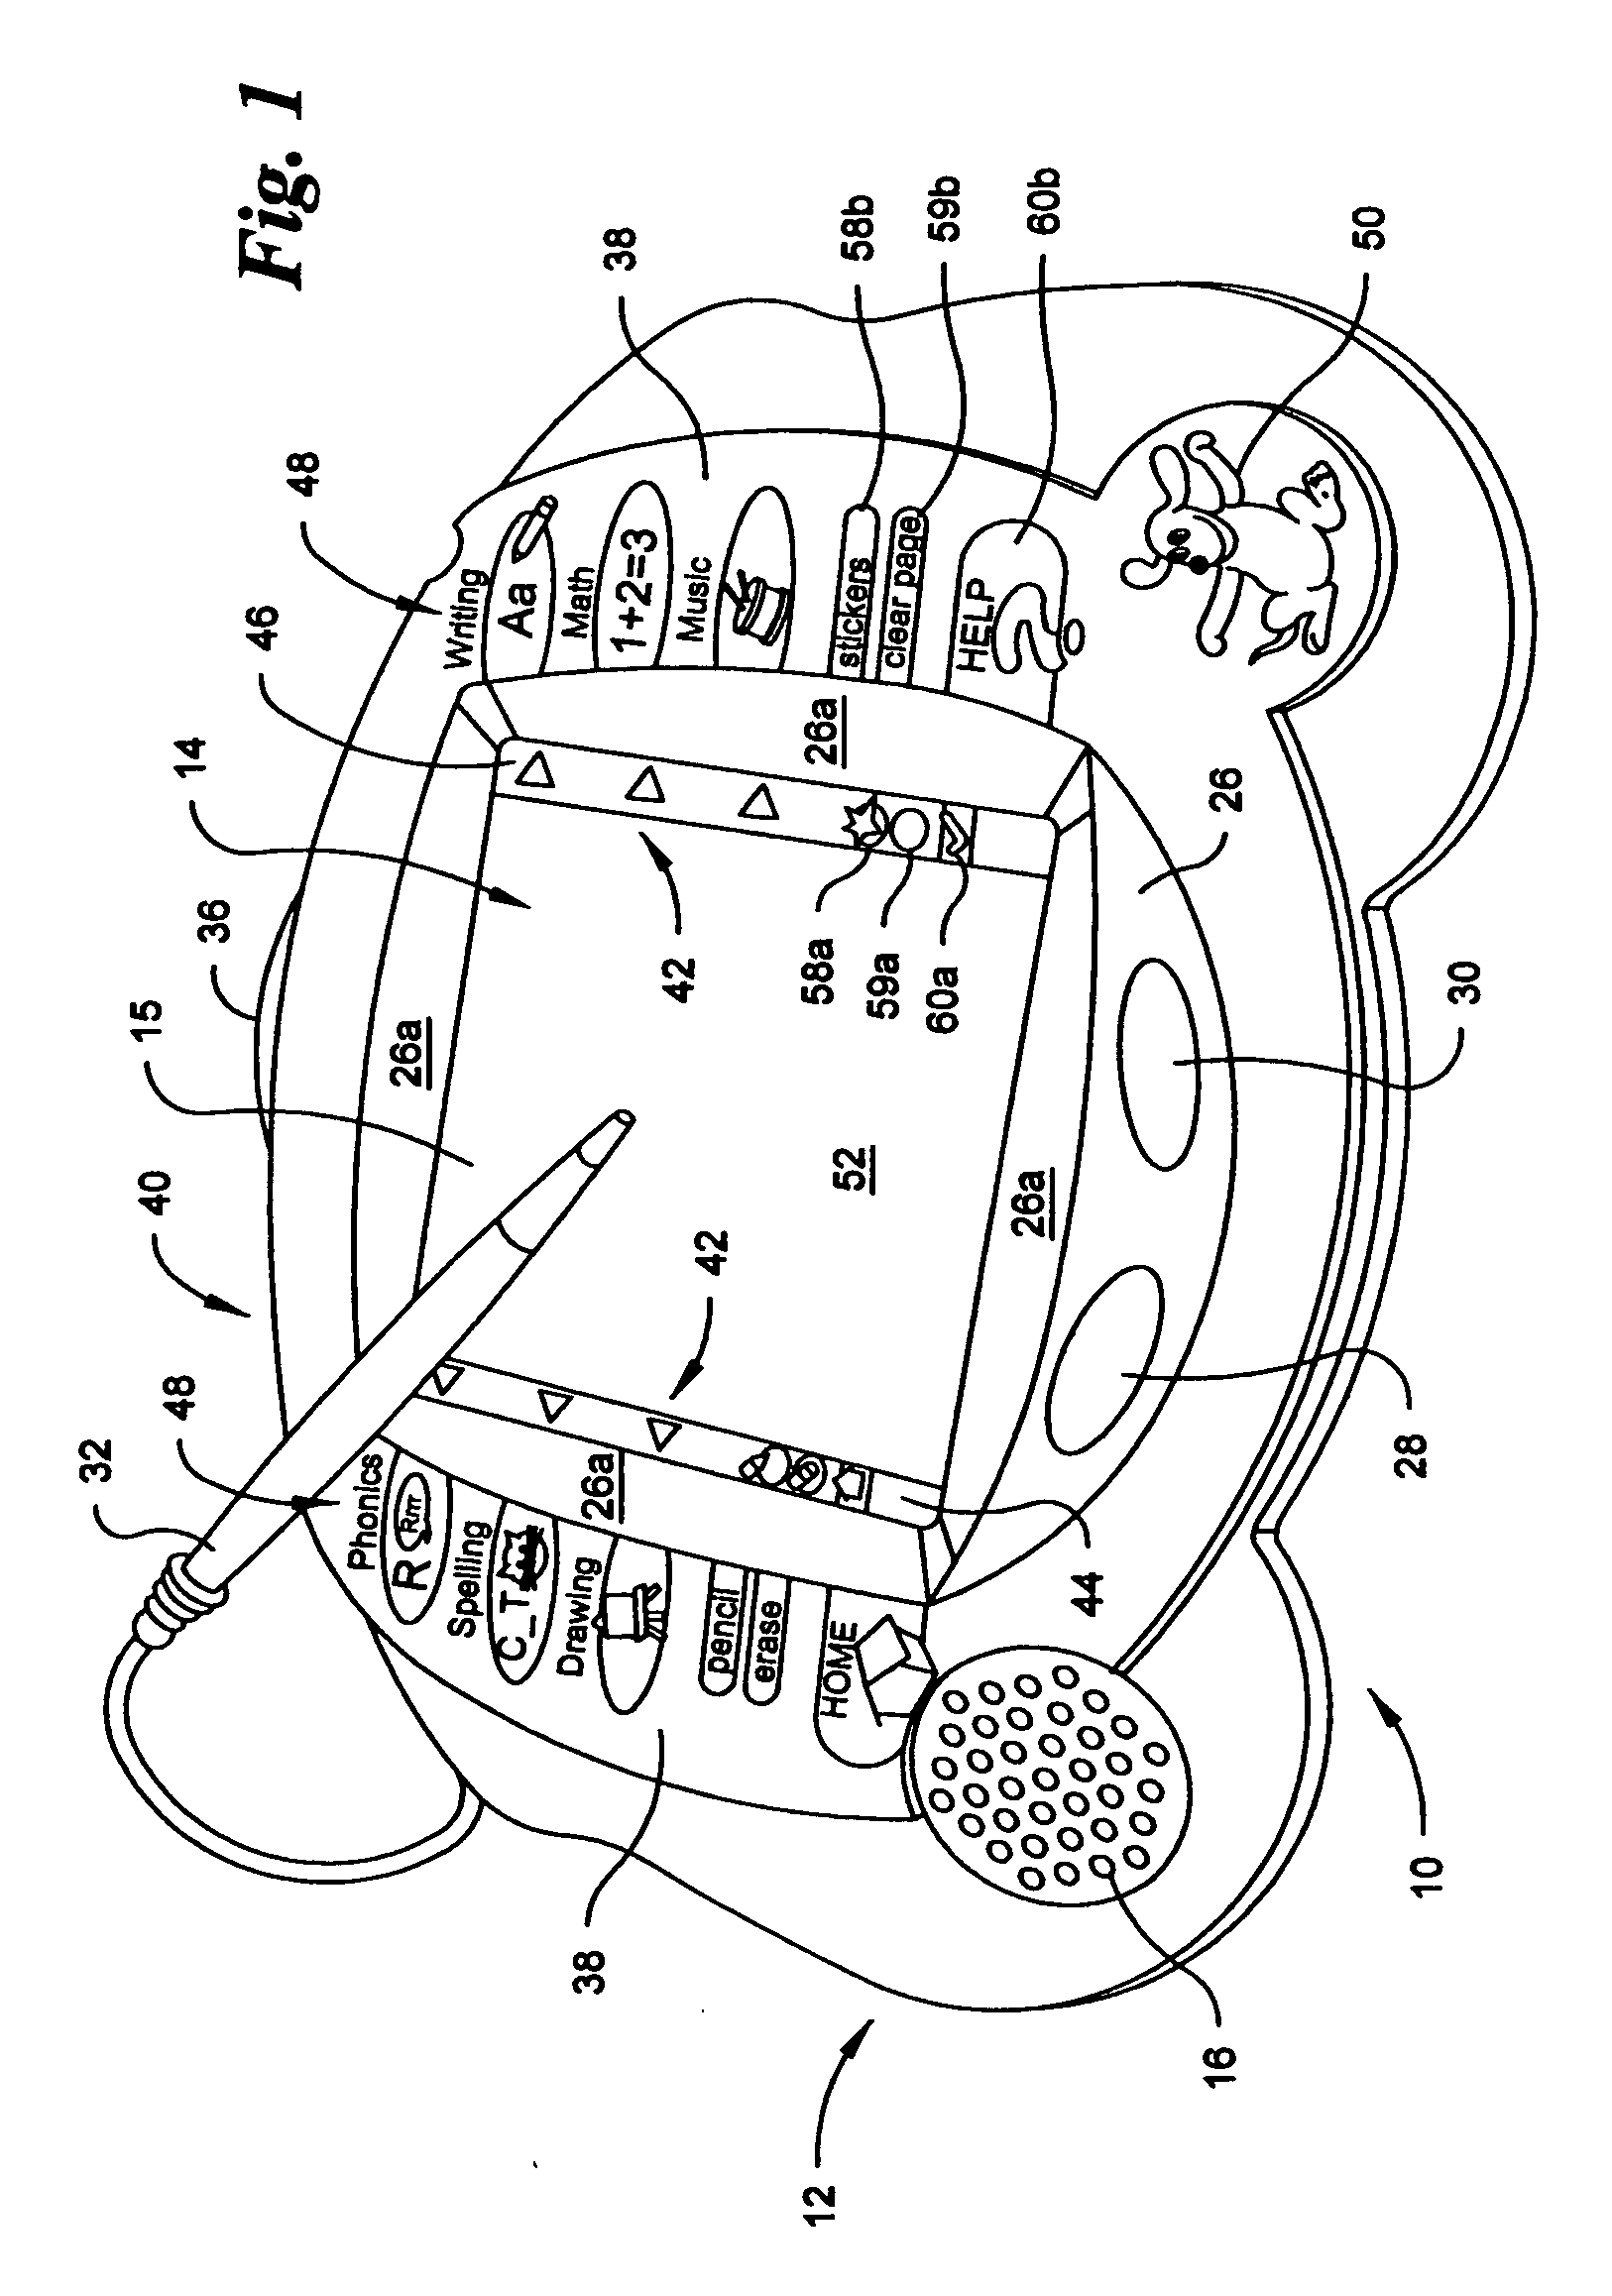 Hand-held interactive electronic device